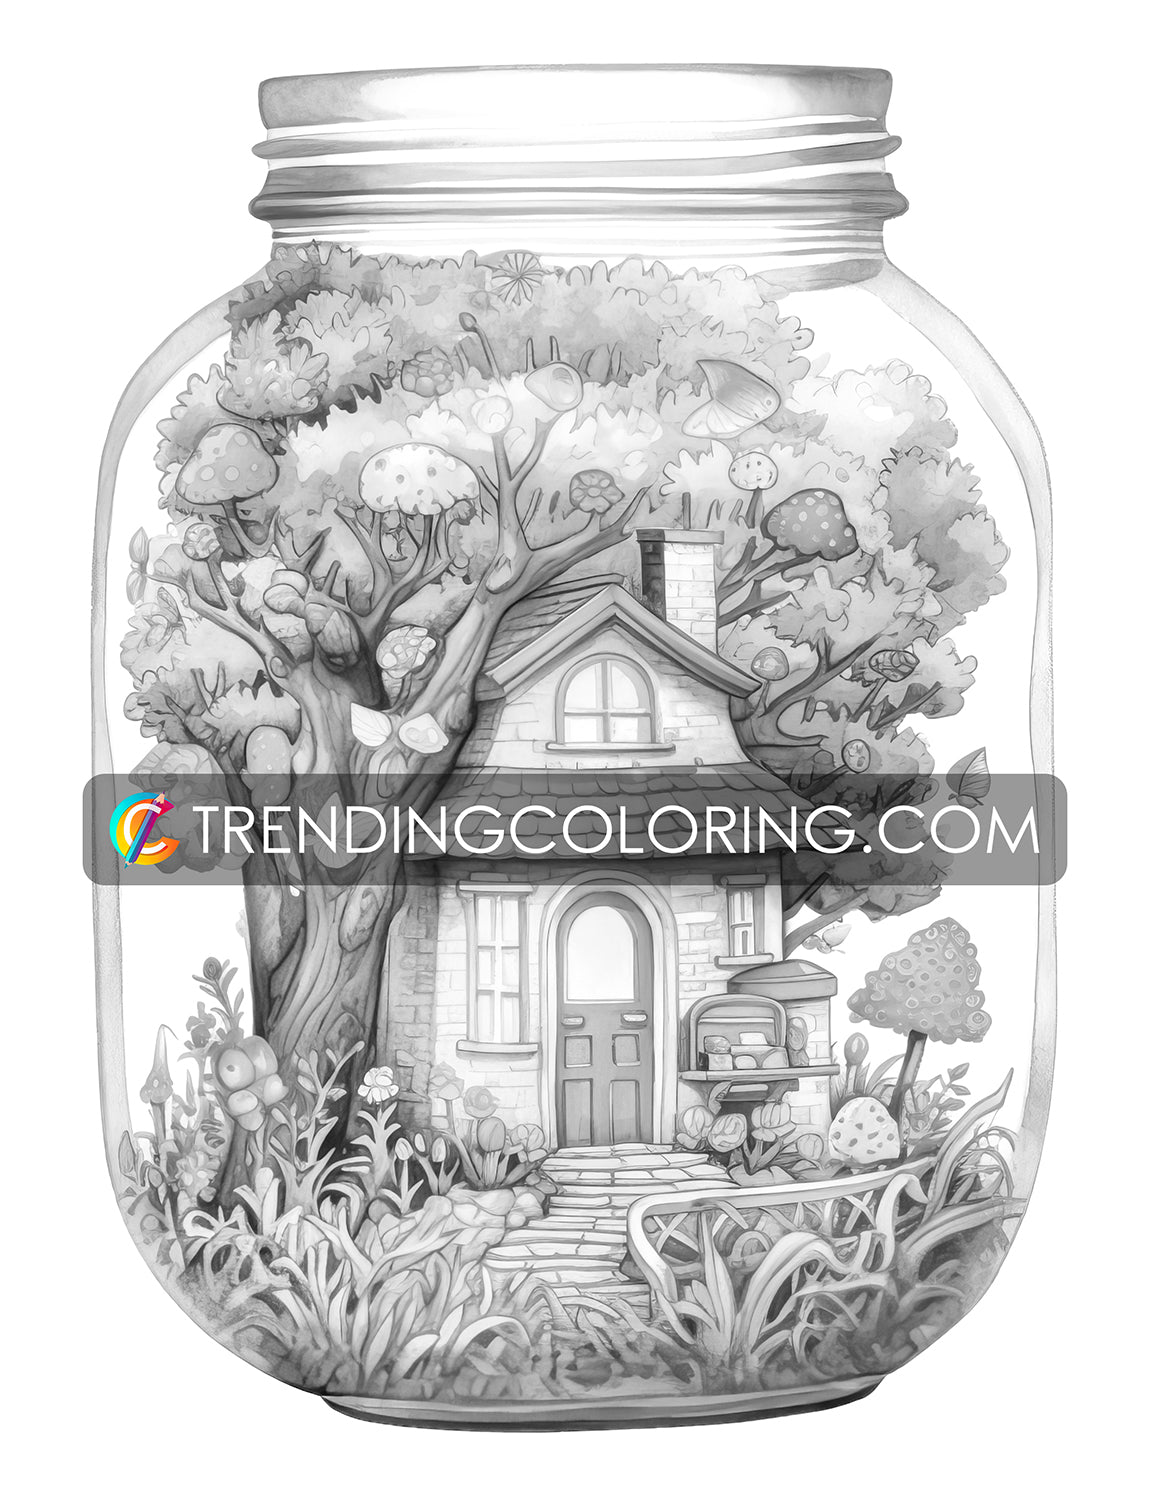 25 Peaceful Life In Jar Grayscale Coloring Pages - Instant Download - Printable PDF Dark/Light